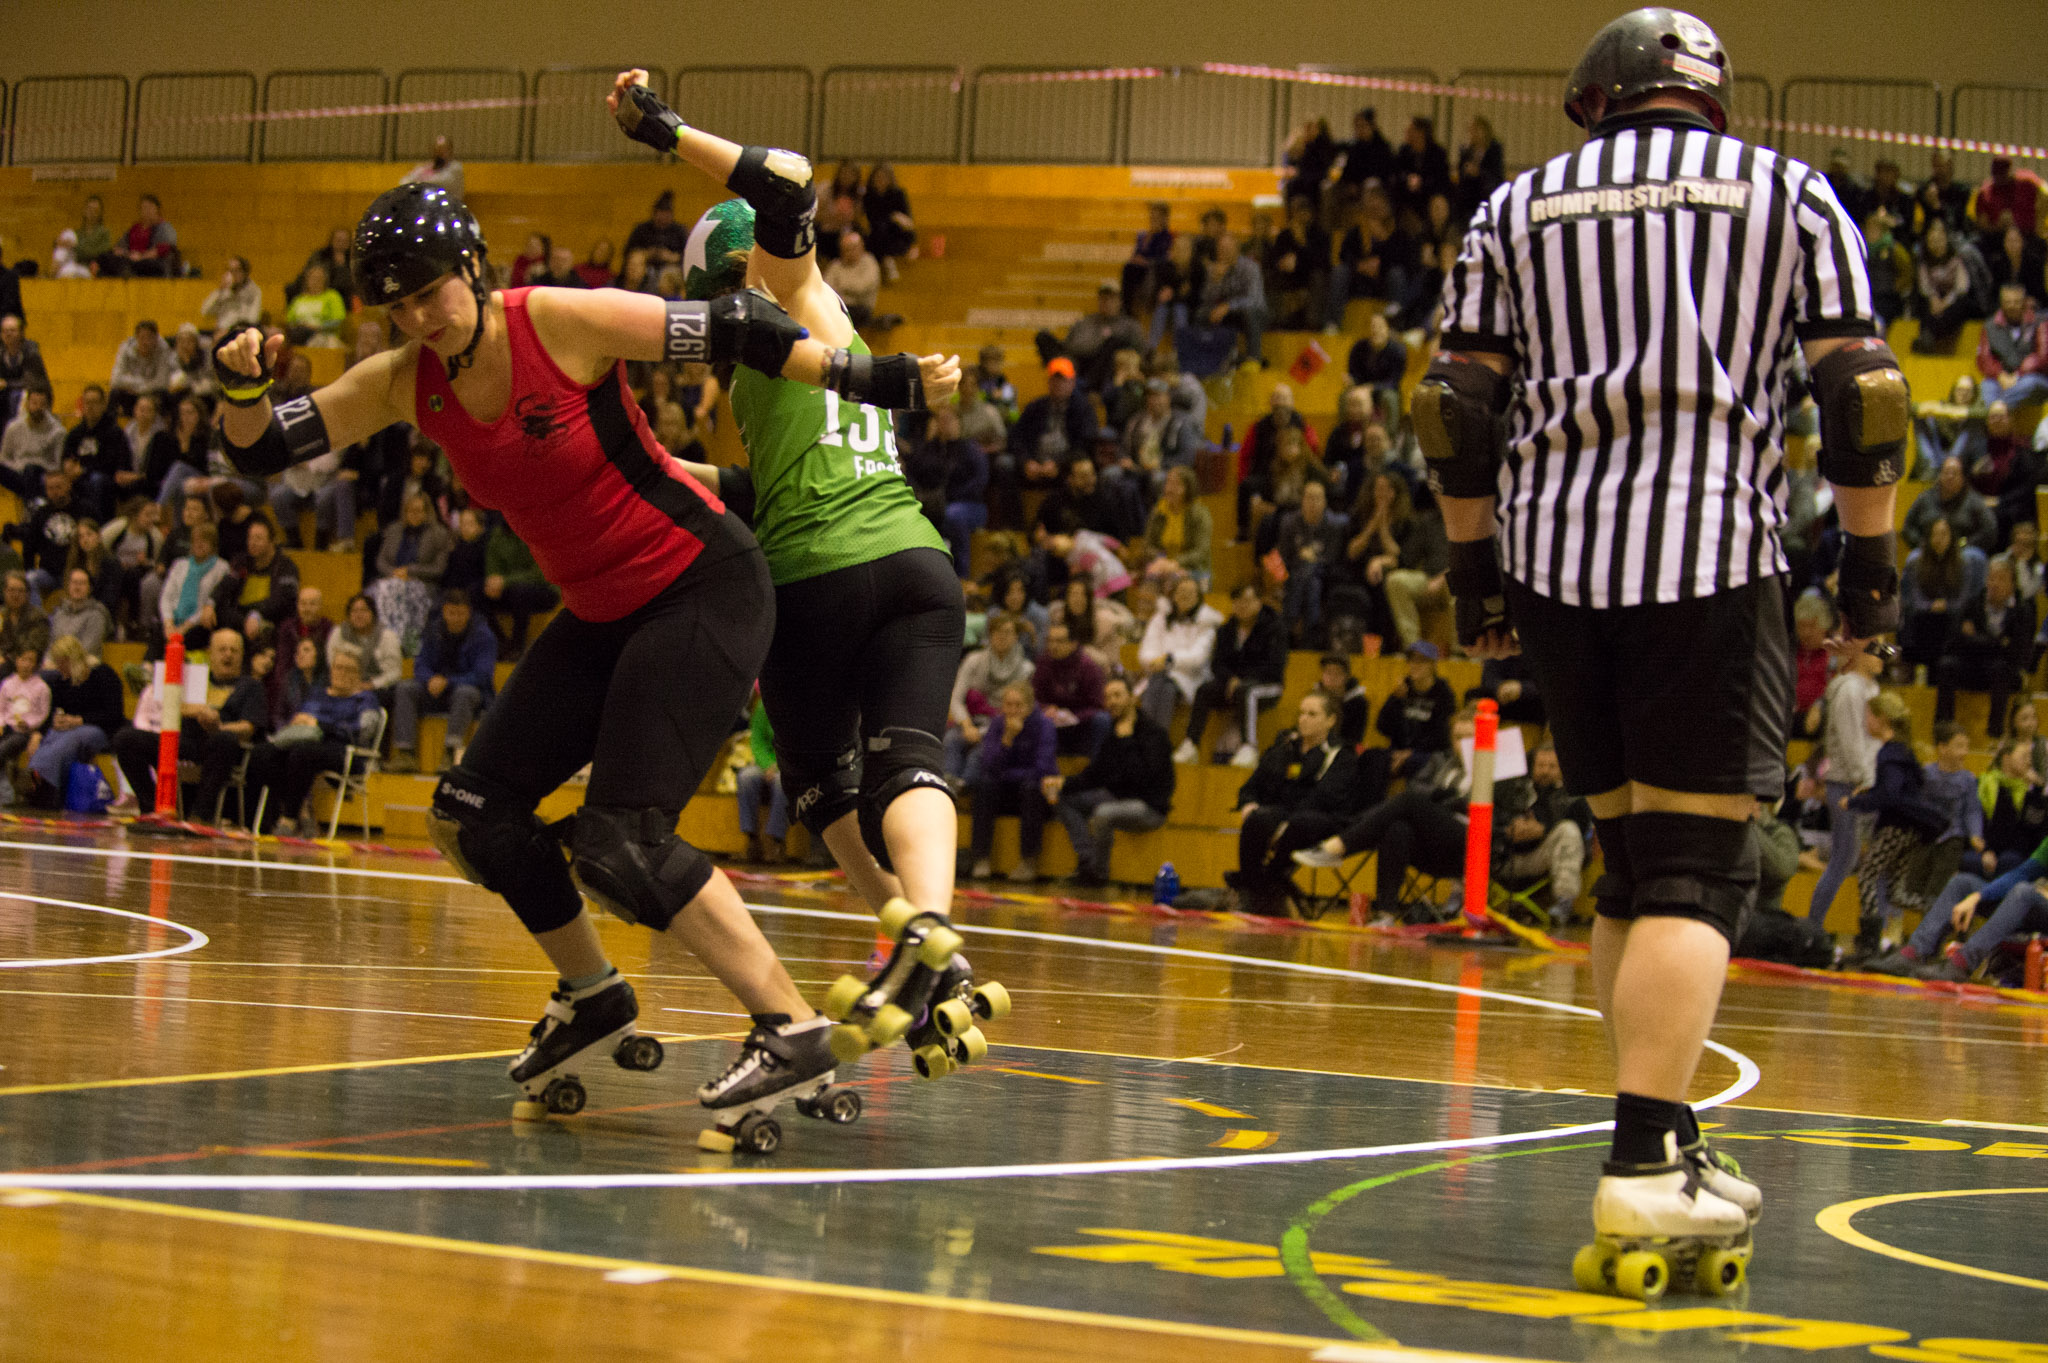 CRDL - Red Bellied Black Hearts v Surly Griffins. Photographer: Brett Sargeant, D-eye Photography